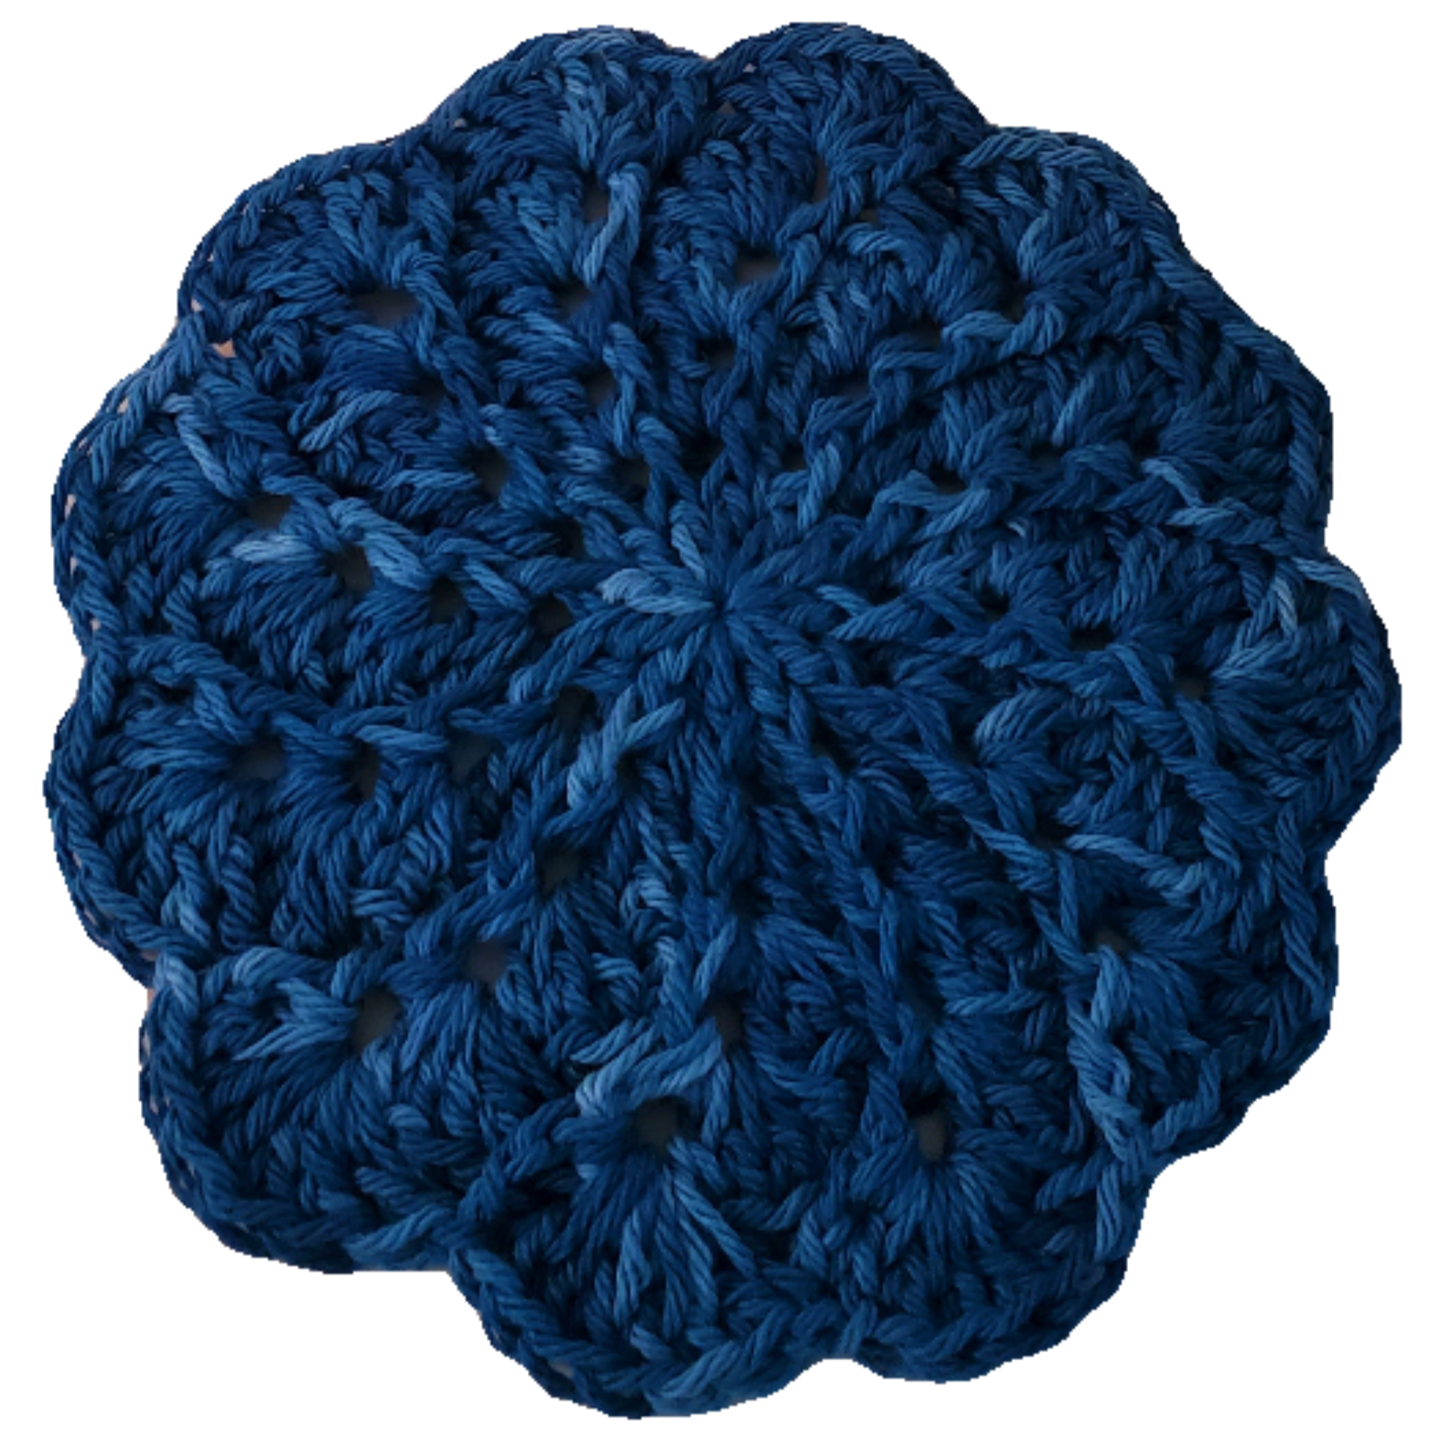 Handcrafted Cotton Scalloped Edge Hot Pad – Variegated Peacock Blue